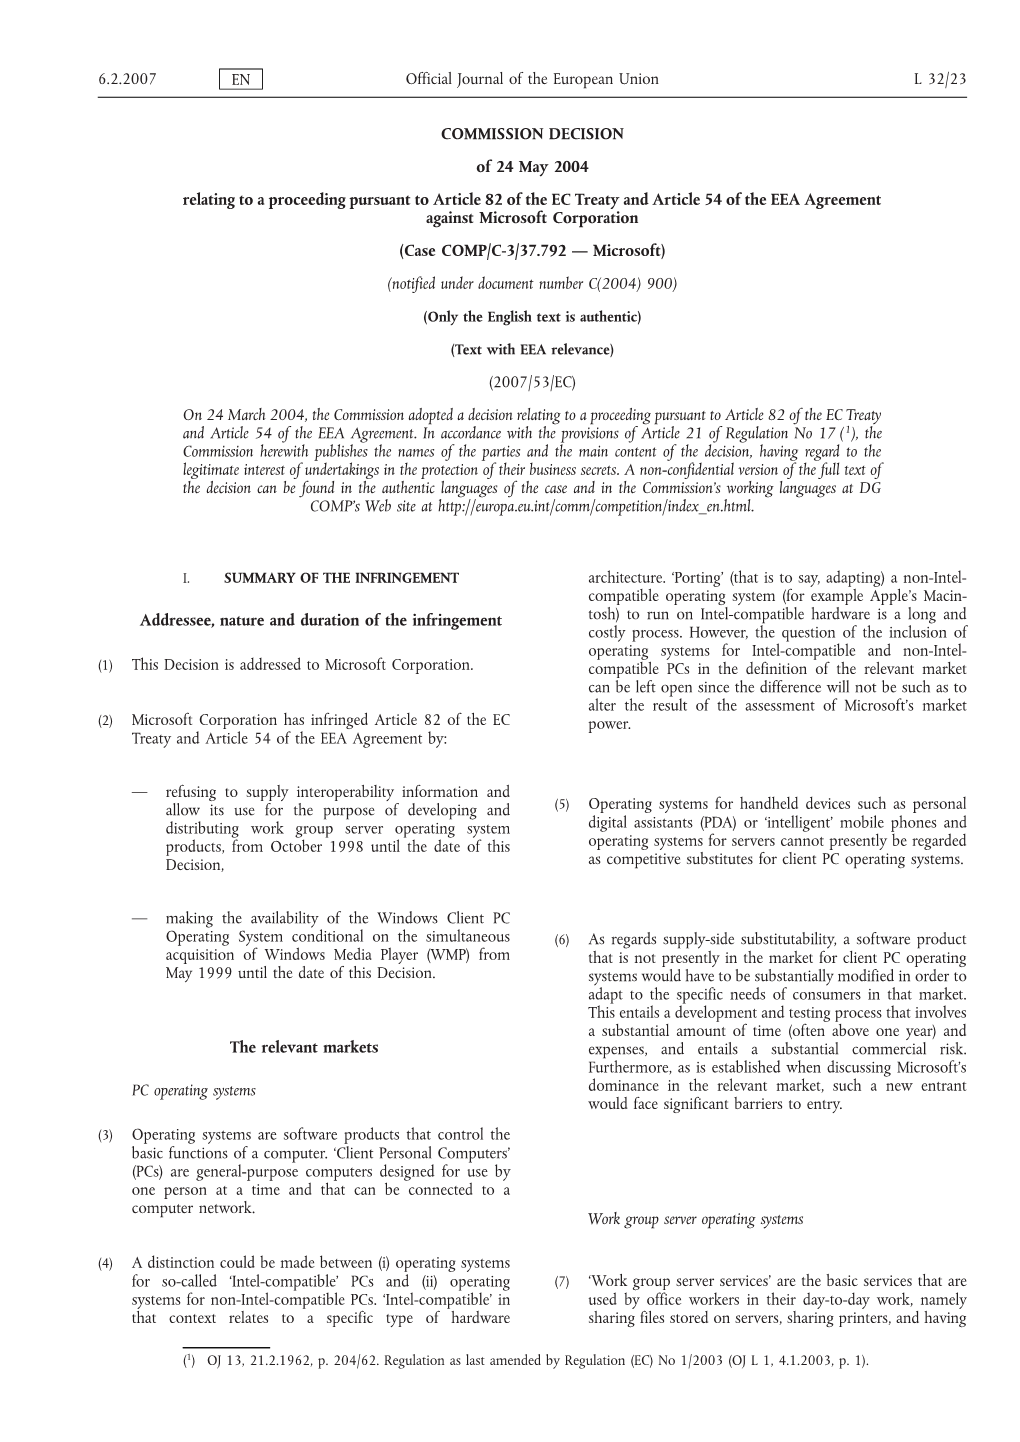 COMMISSION DECISION of 24 May 2004 Relating to a Proceeding